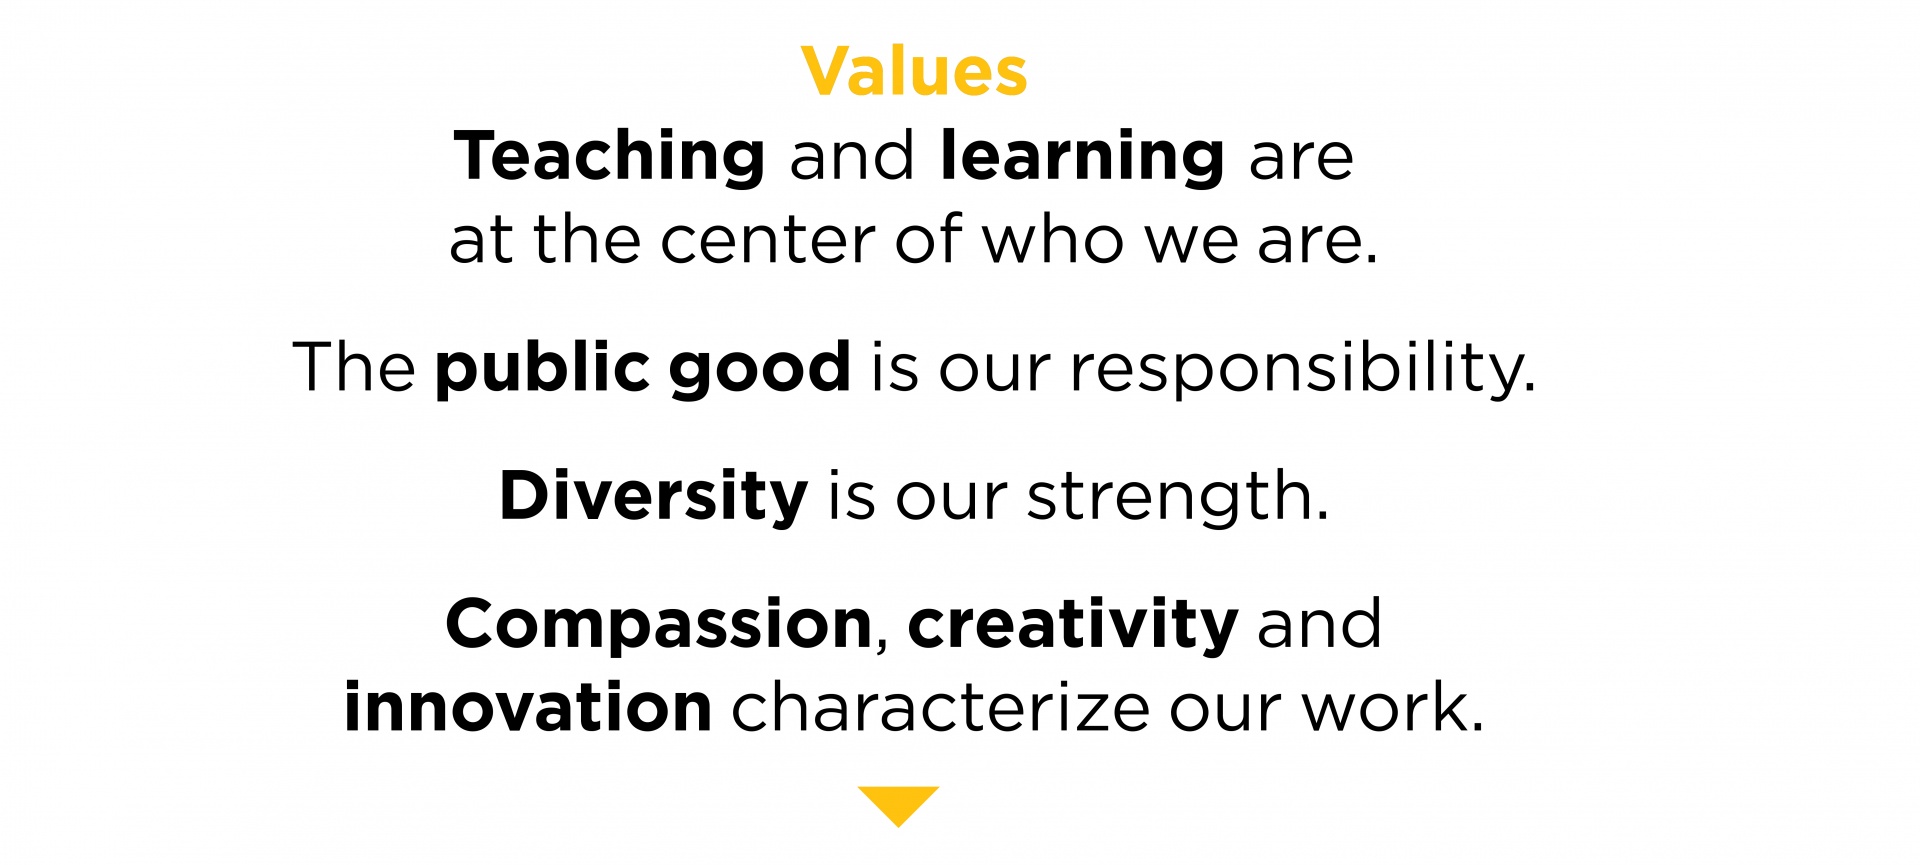 Values Teaching and learning are at the center of who we are. The public good is our responsibility. Diversity is our strength. Compassion, creativity, and innovation characterize our work.